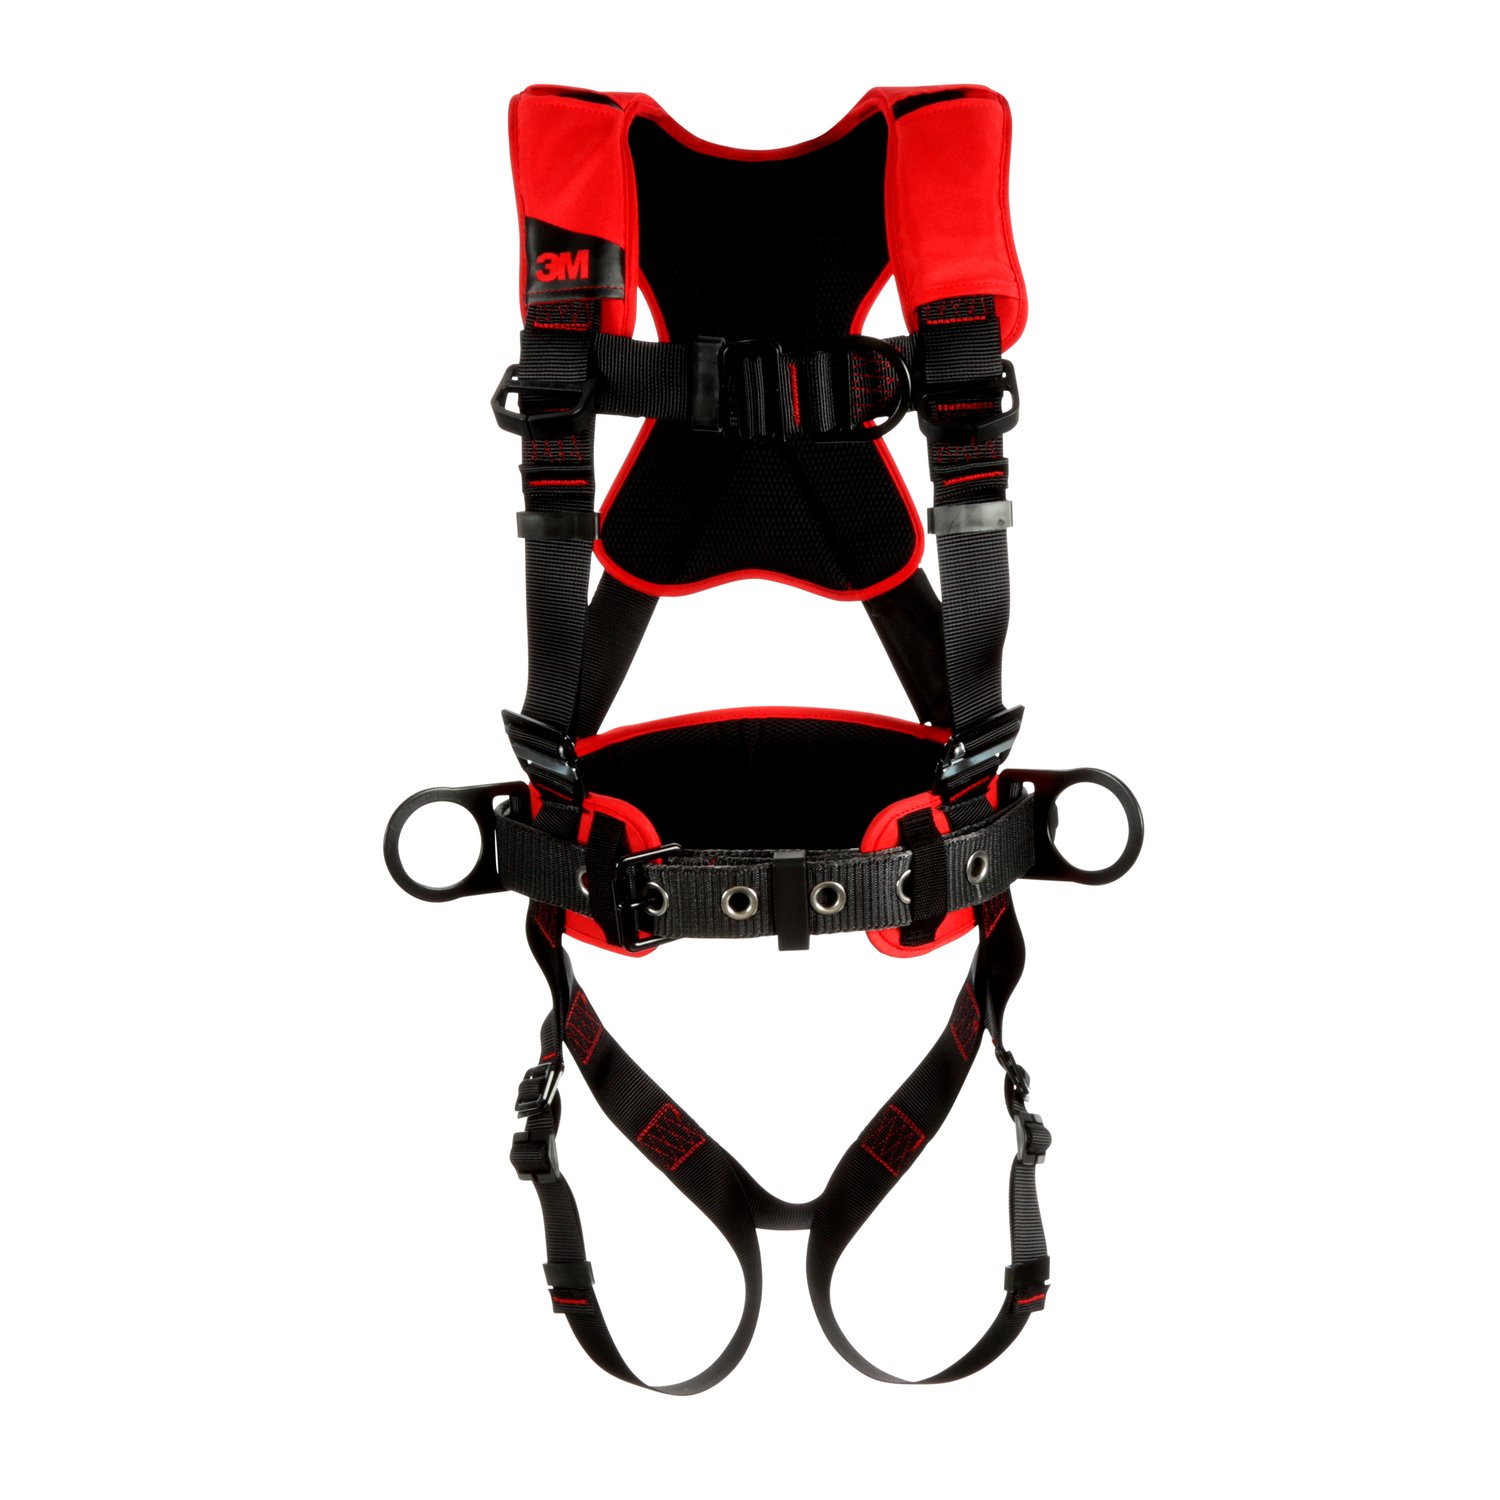 7012816616 - 3M Protecta P200 Comfort Construction Climbing/Positioning Safety Harness 1161211, X-Large